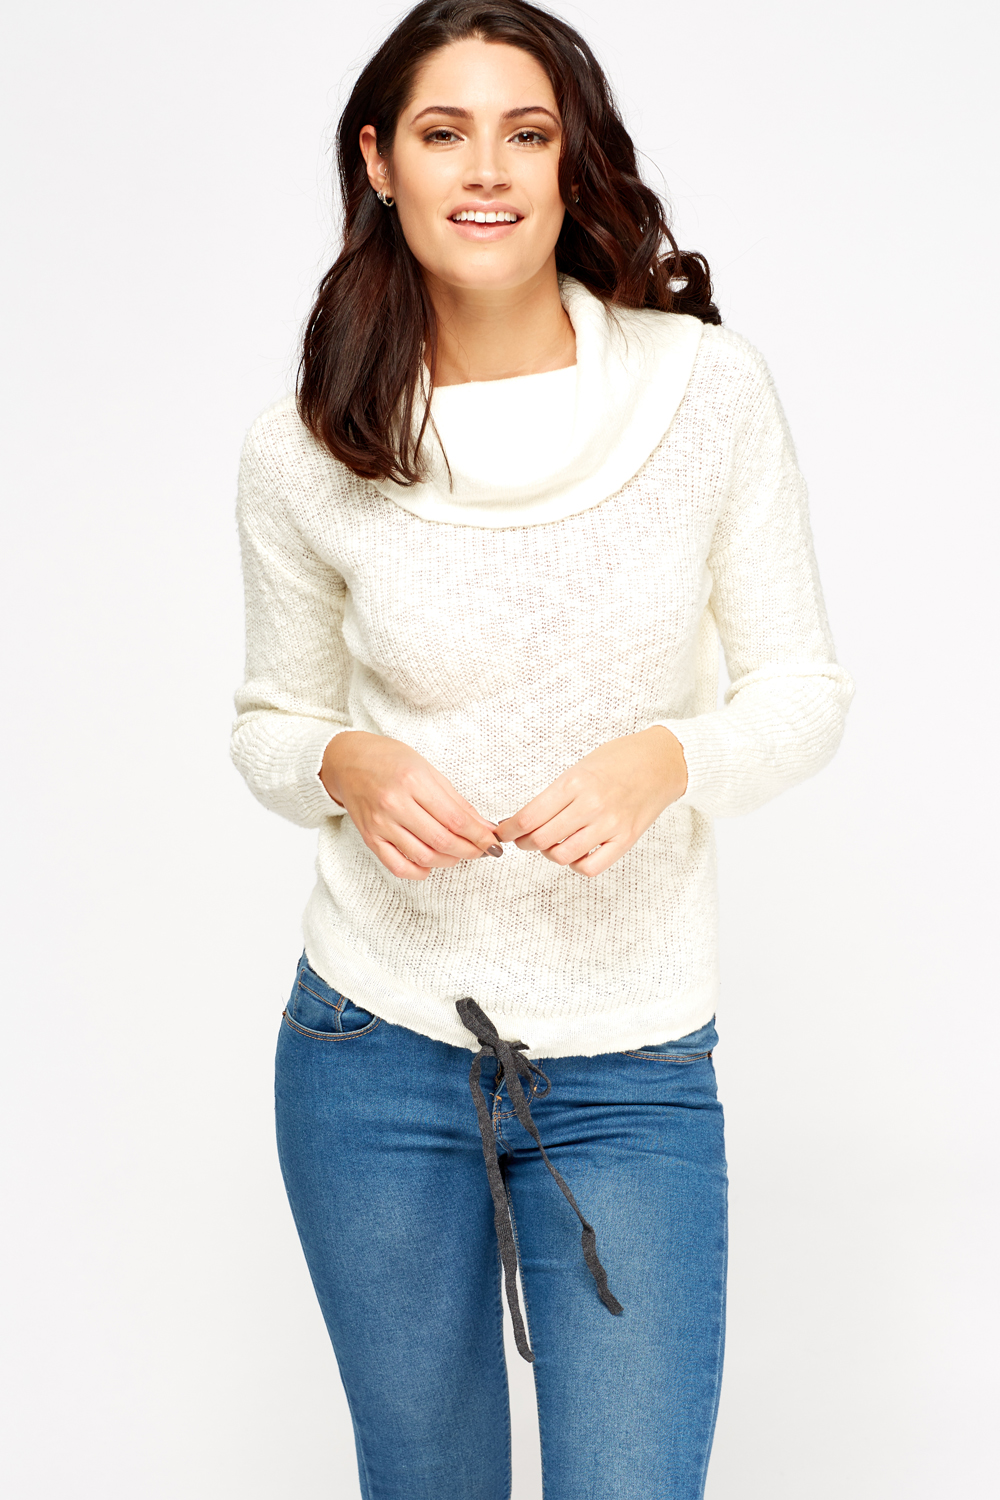 Cowl Neck Knitted Jumper Just 7